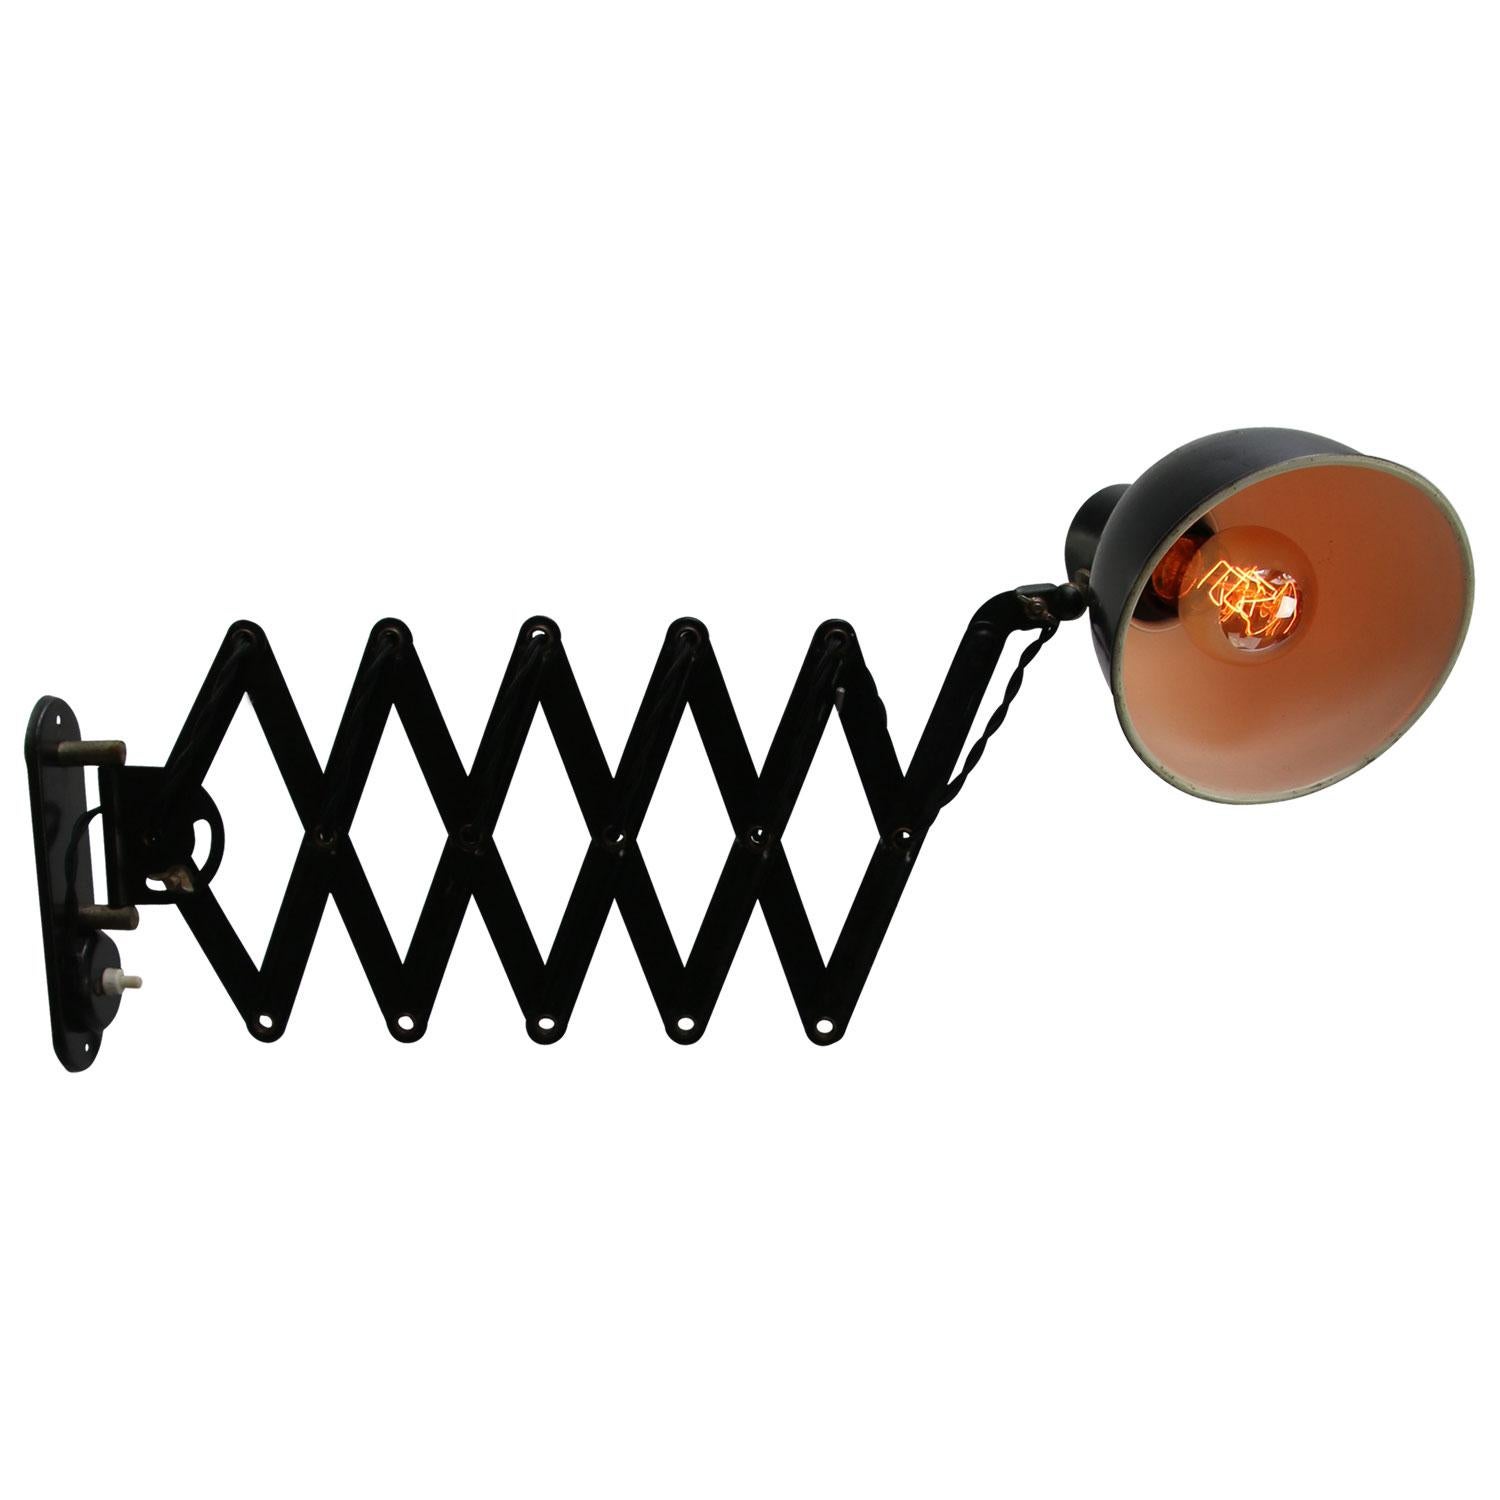 Scissor wall lamp
Black metal shade and white interior adjustable length and horizontally and vertically swiveling arm

shade size: diameter 16 cm
90° angle adjustable shade

as shown on picture: 65 cm
min length 39 cm
max length 100